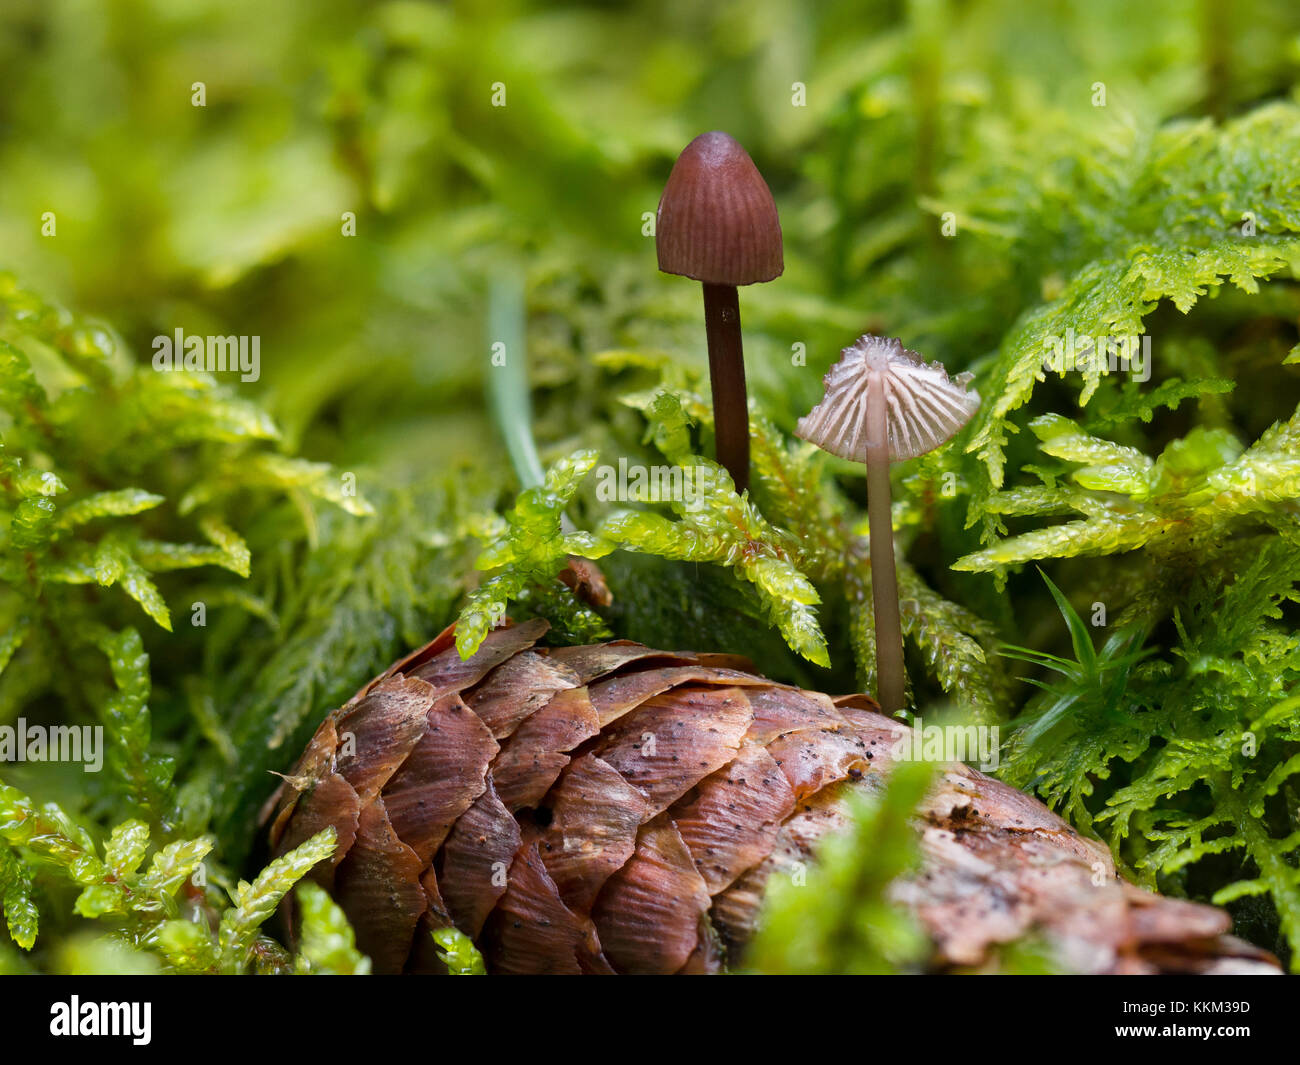 Mushrooms and fir cone in moss Stock Photo